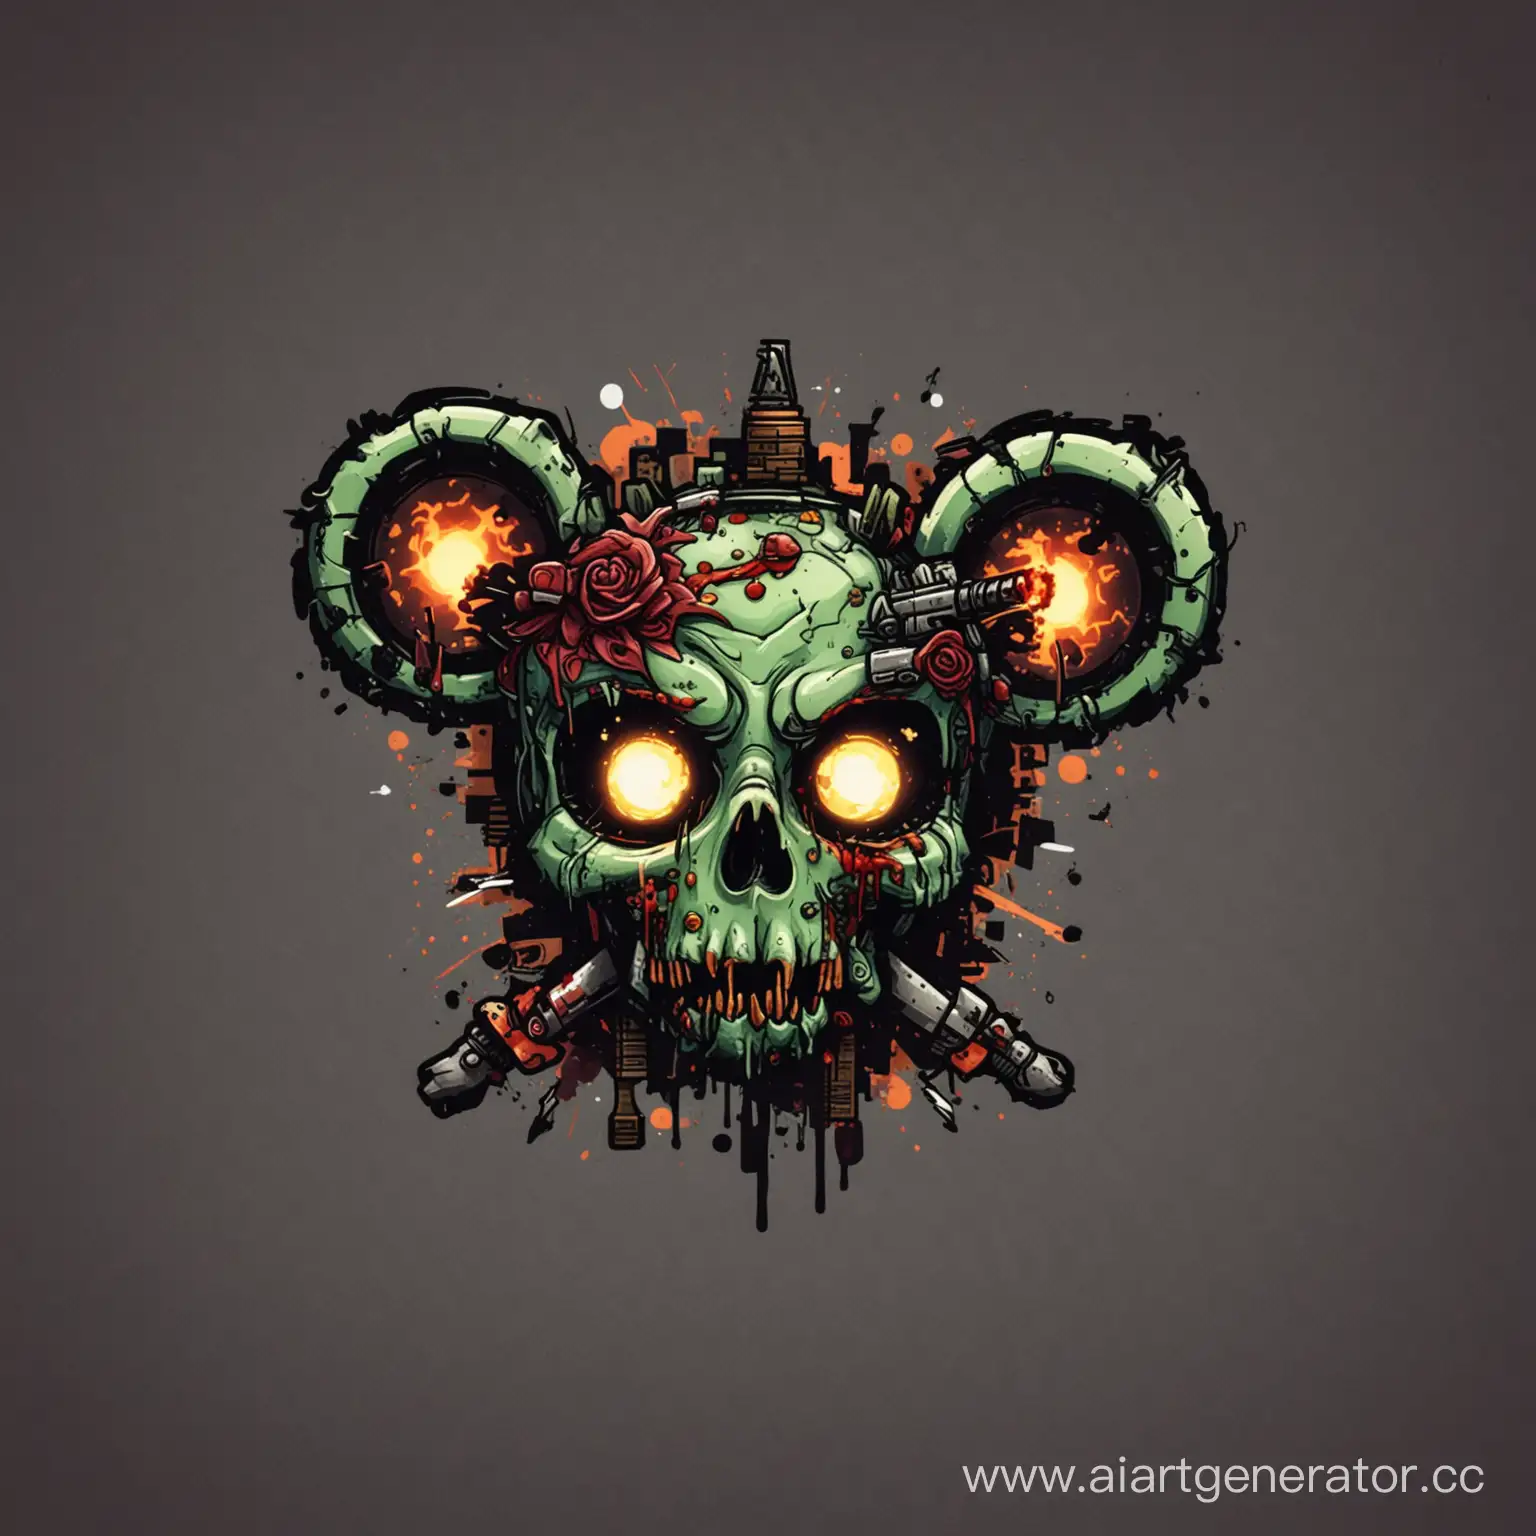 Zombie-Apocalypse-Themed-Optical-Cursor-with-Macabre-Design-Elements